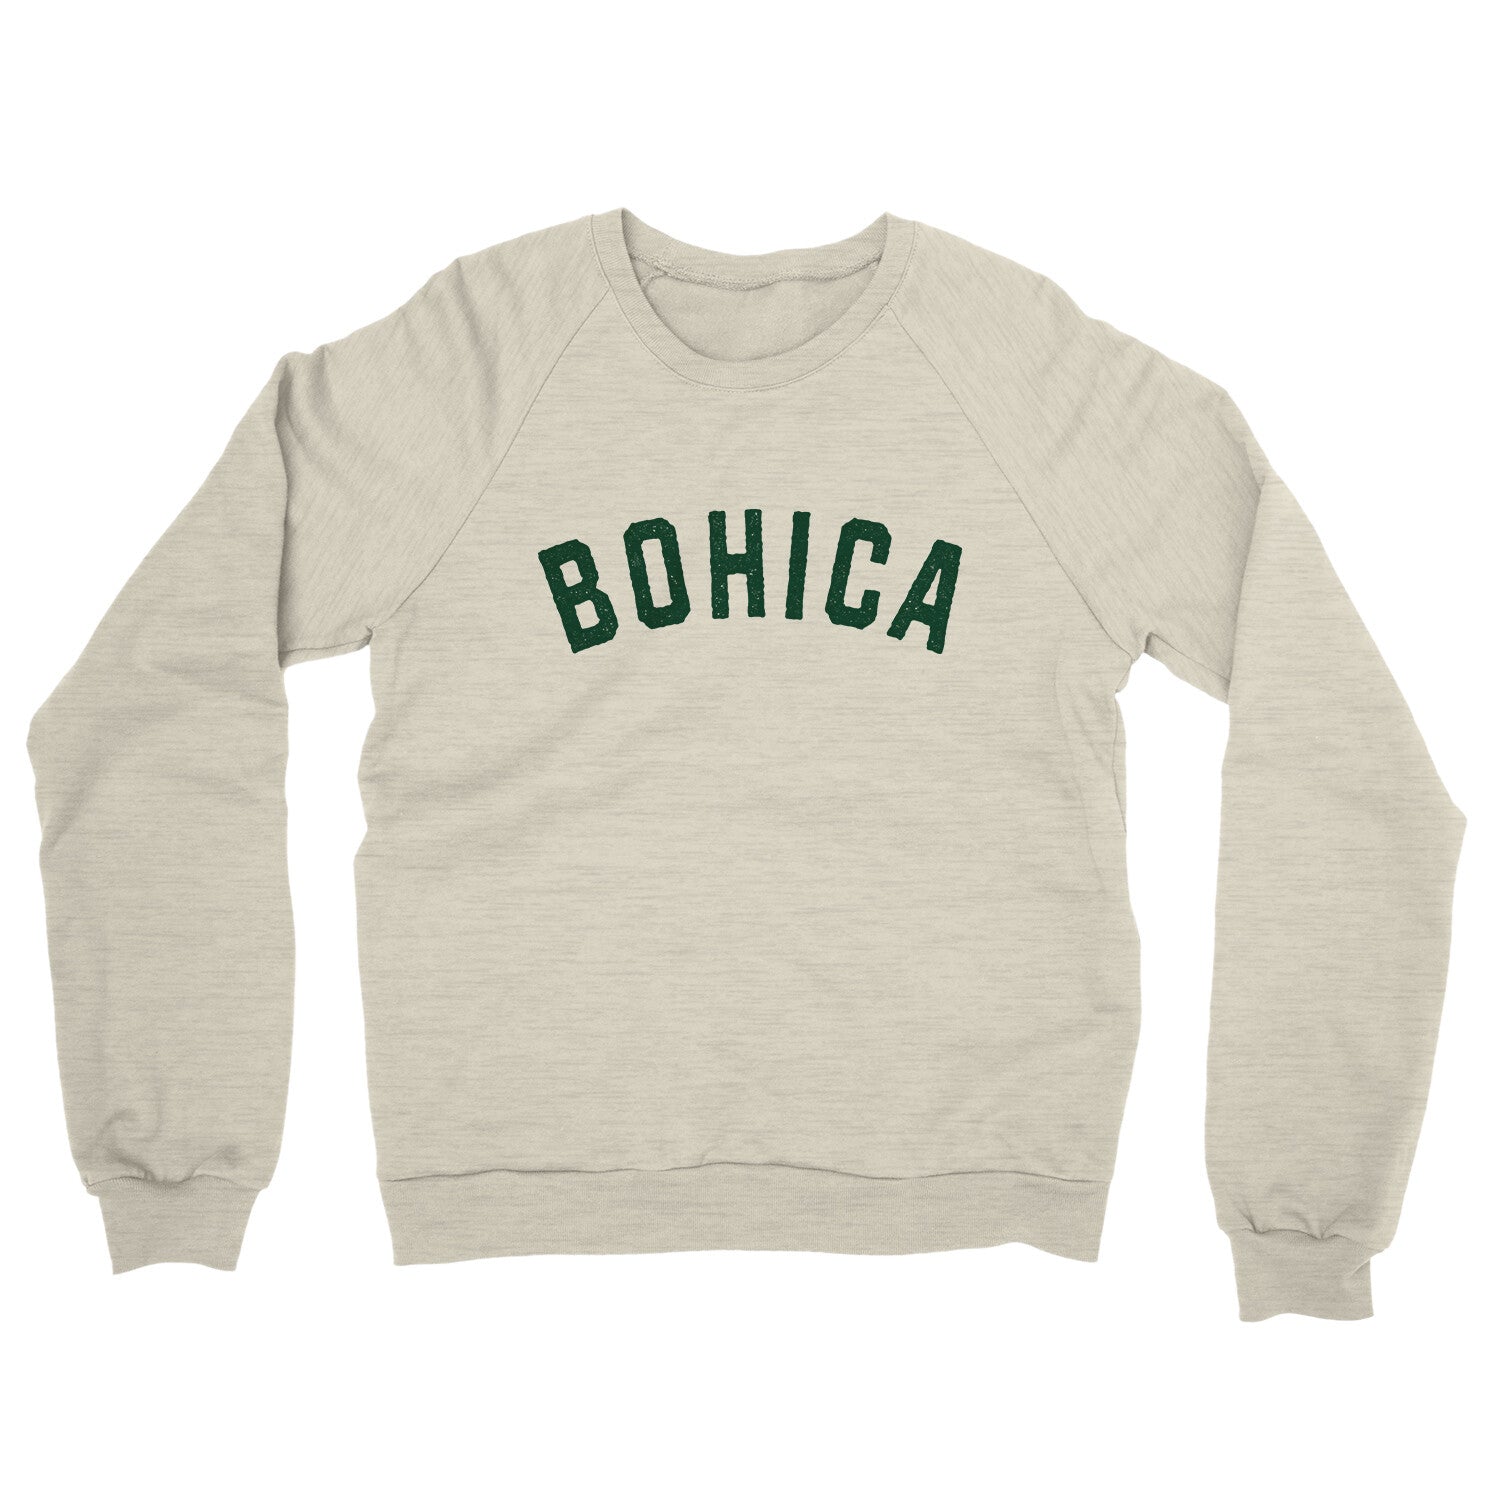 Bohica in Heather Oatmeal Color